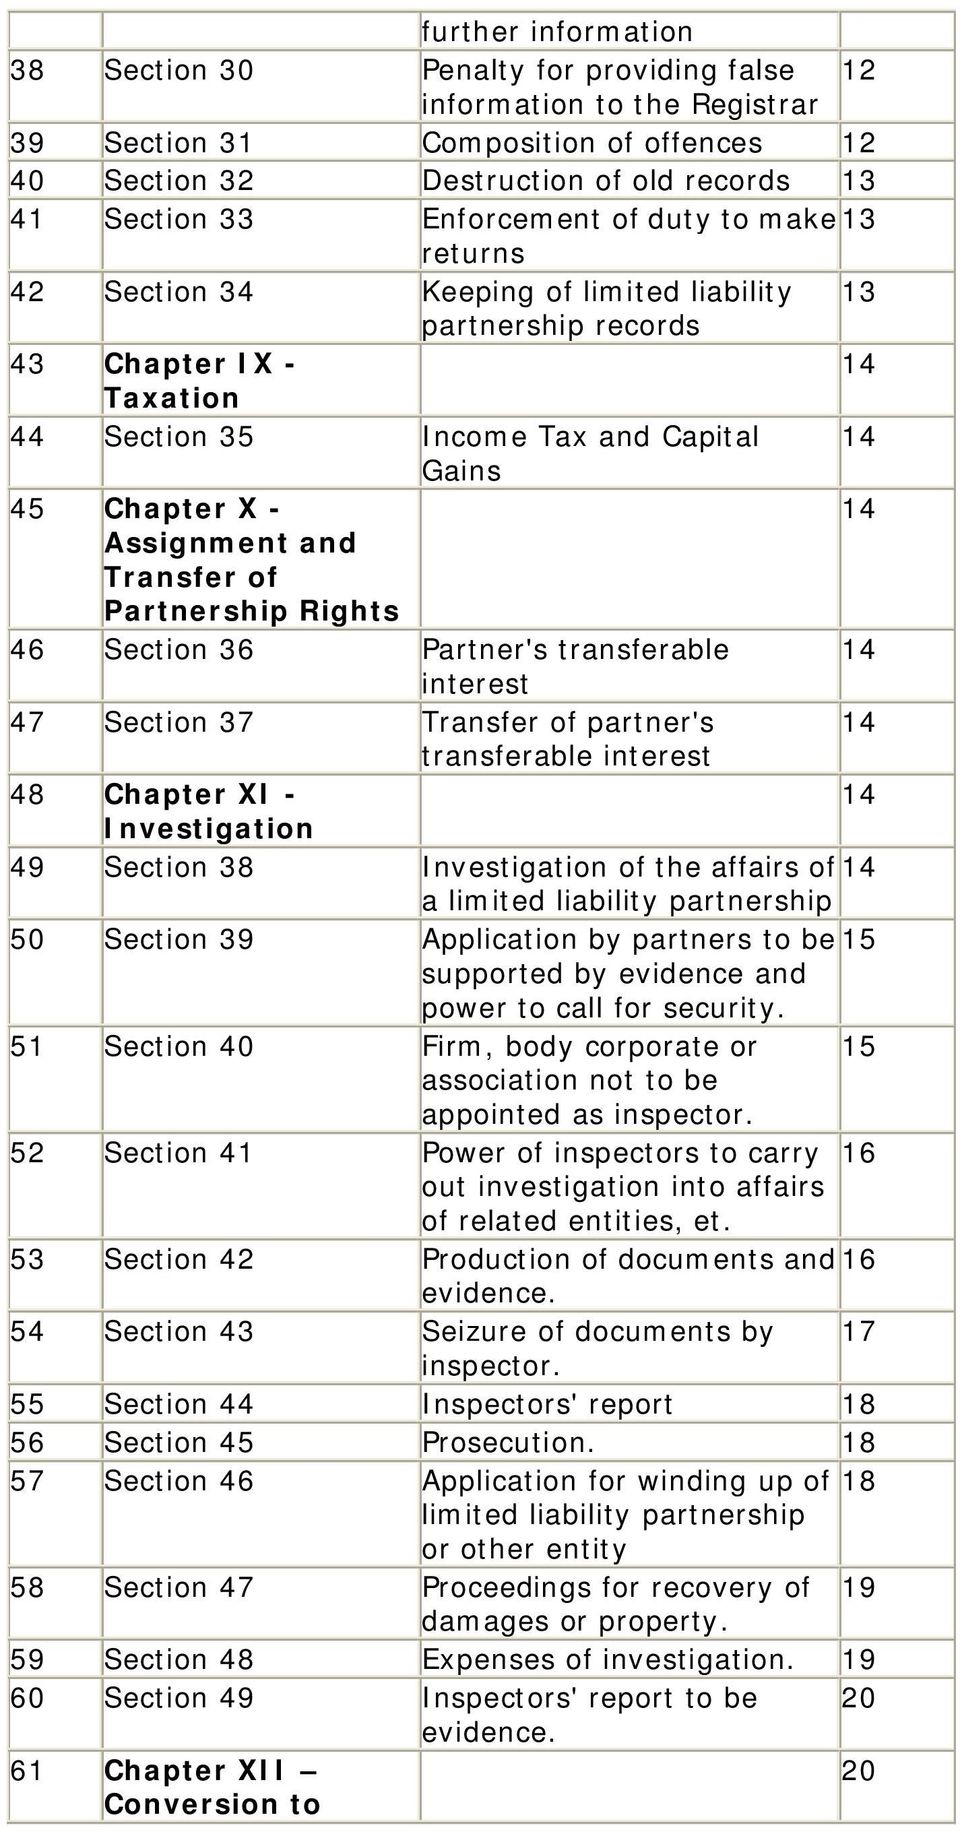 Assignment and Transfer of Partnership Rights 46 Section 36 Partner's transferable 14 interest 47 Section 37 Transfer of partner's 14 transferable interest 48 Chapter XI - 14 Investigation 49 Section